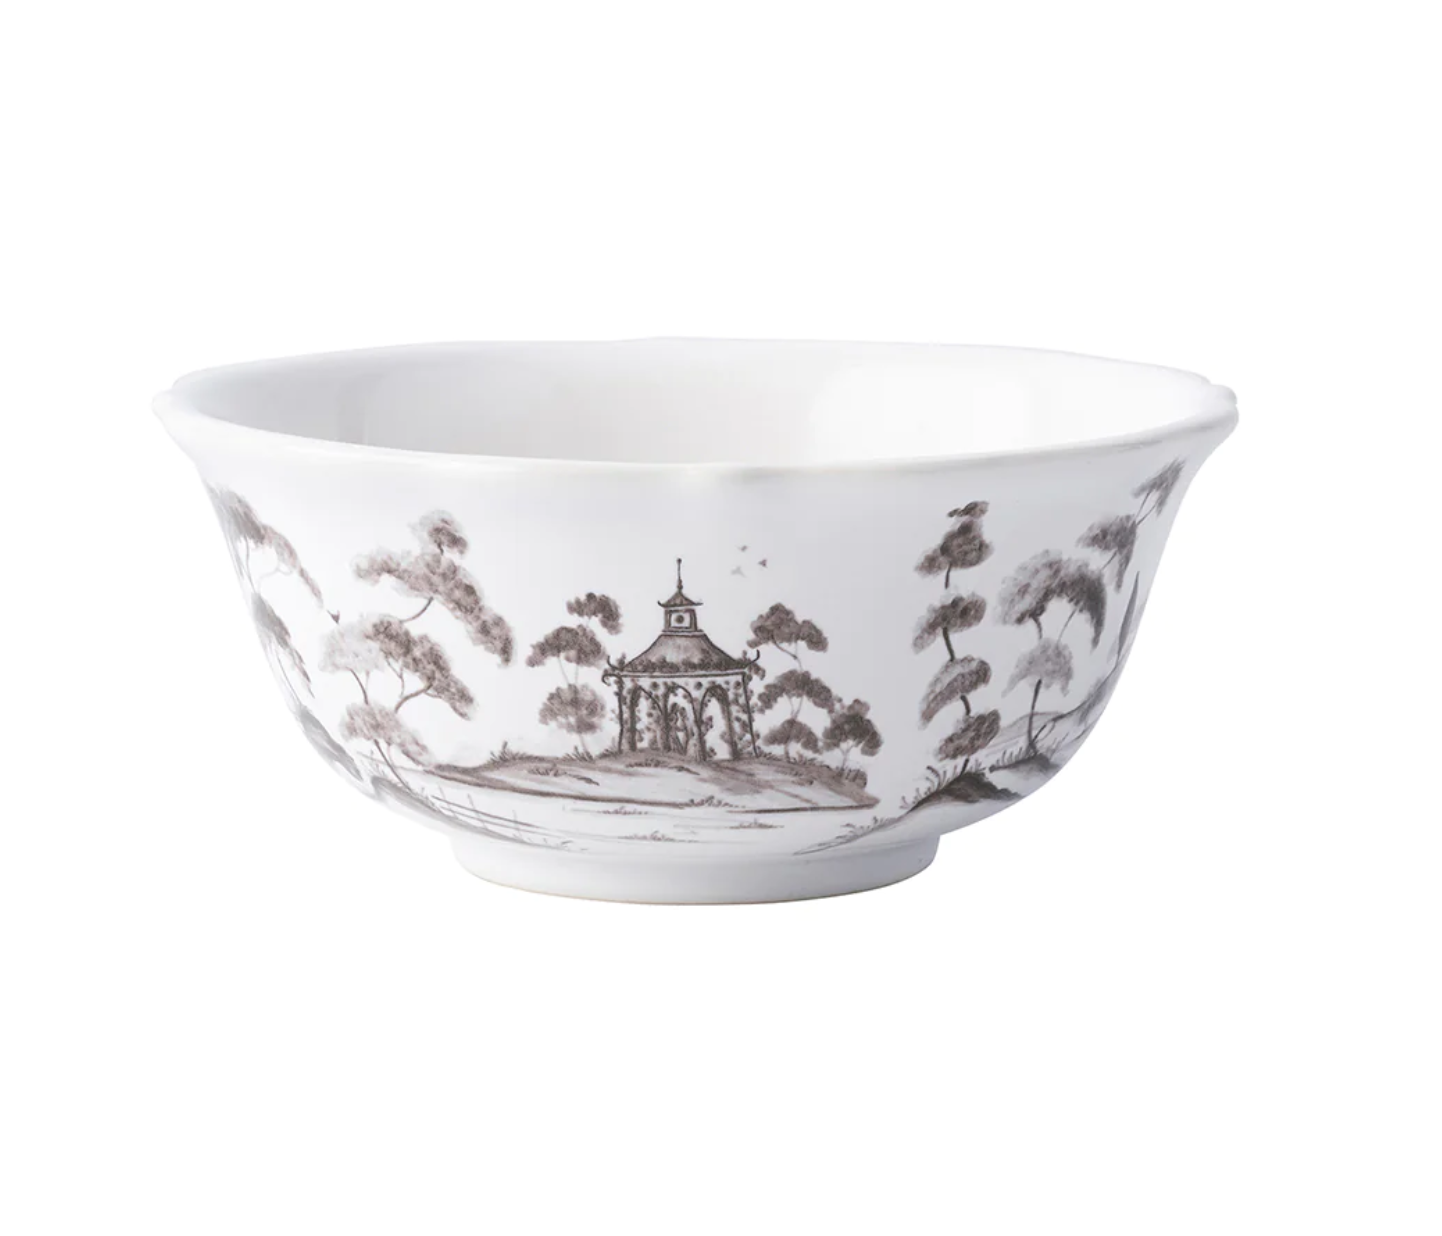 Country Estate Cereal/Ice Cream Bowl